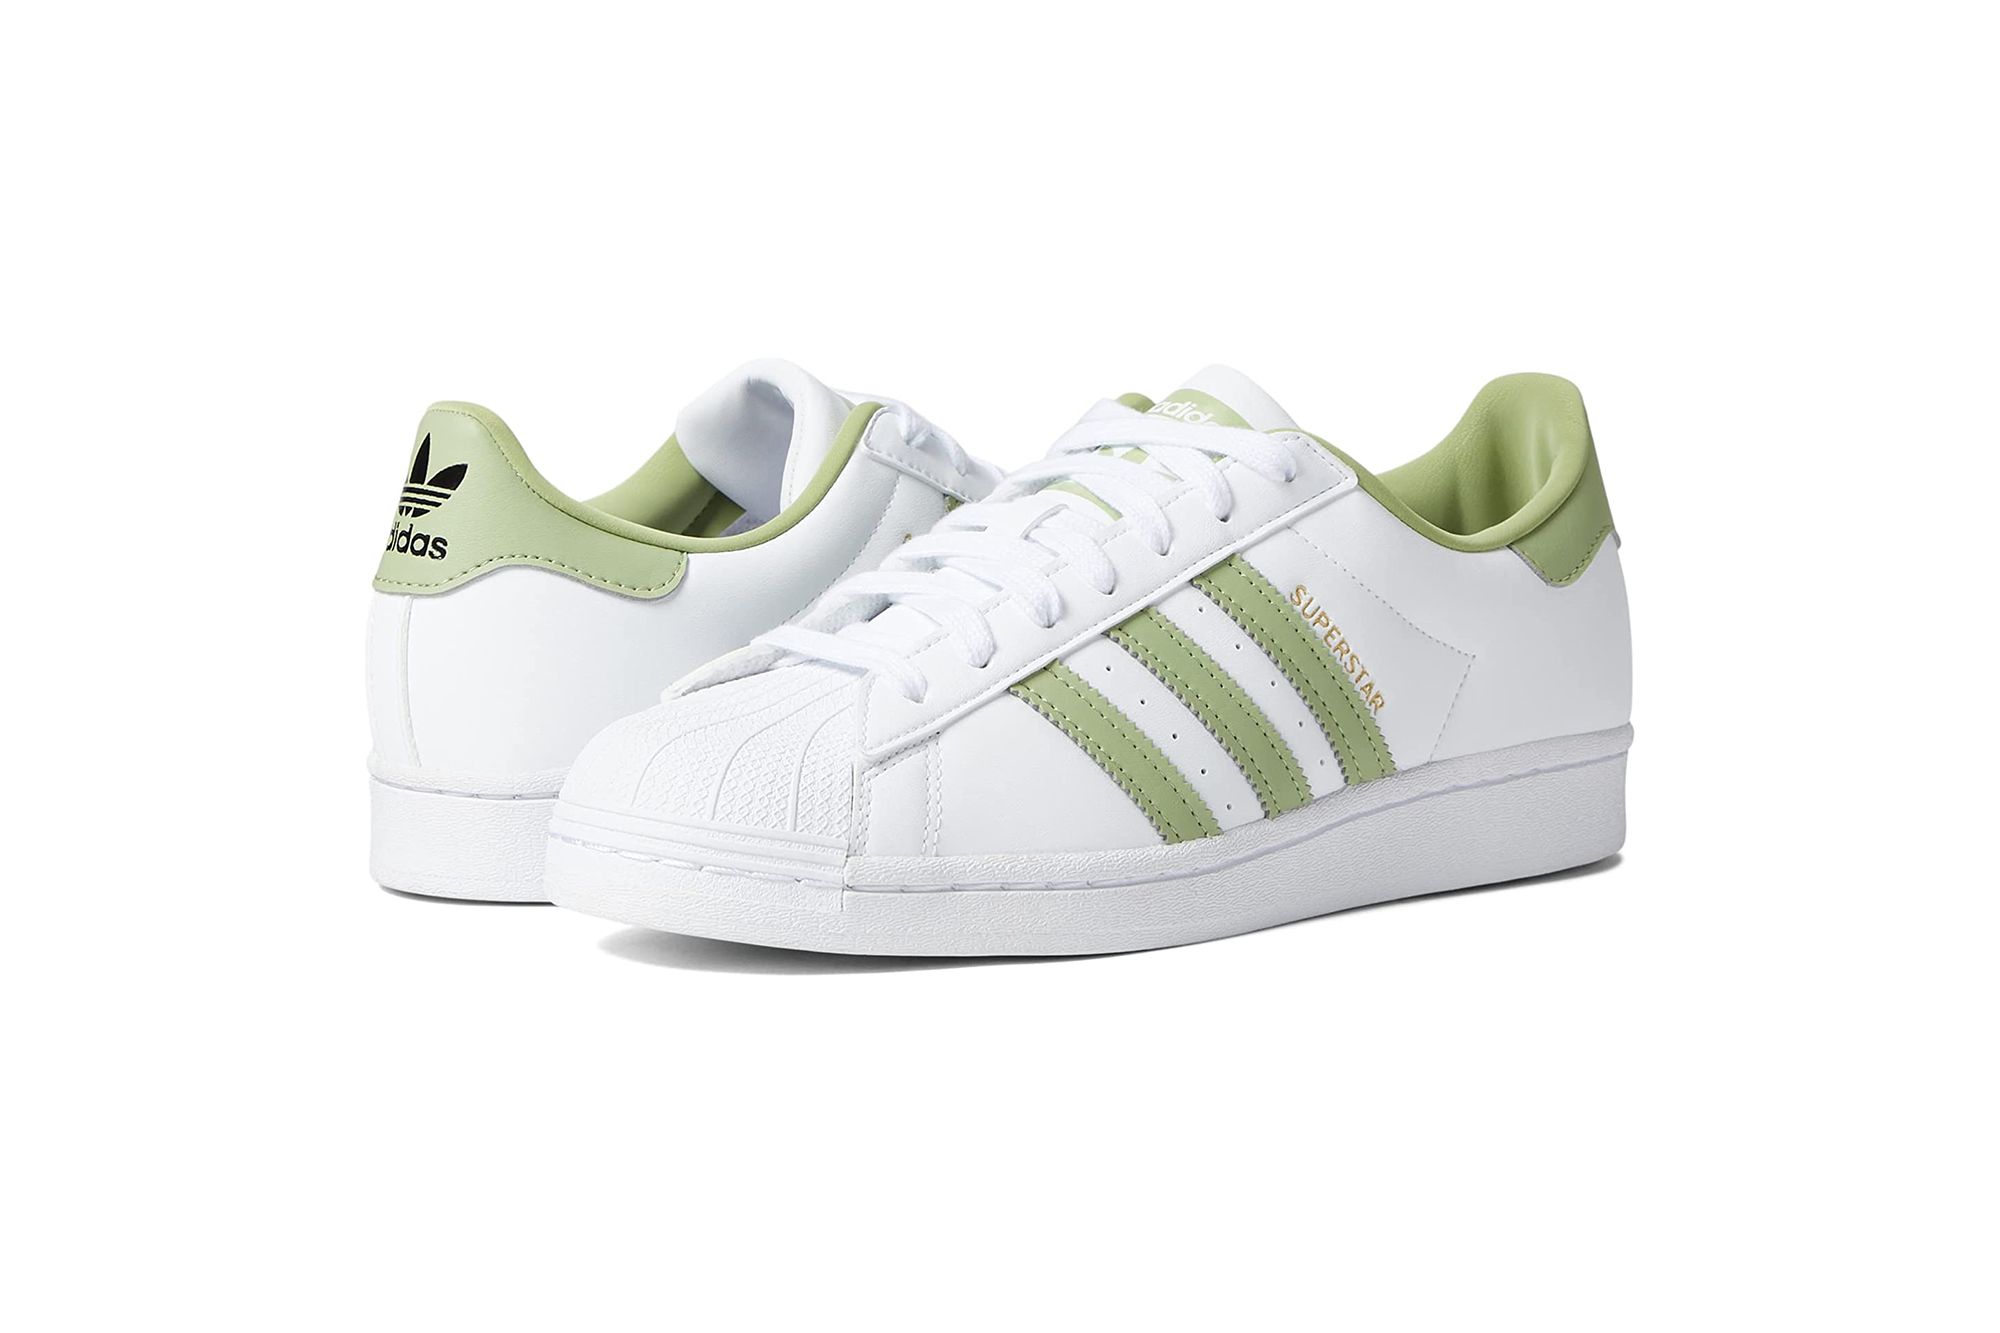 Adidas Classic Sneakers Have a Pop of Color That's Ideal for Spring اوراق اللبلاب شراب